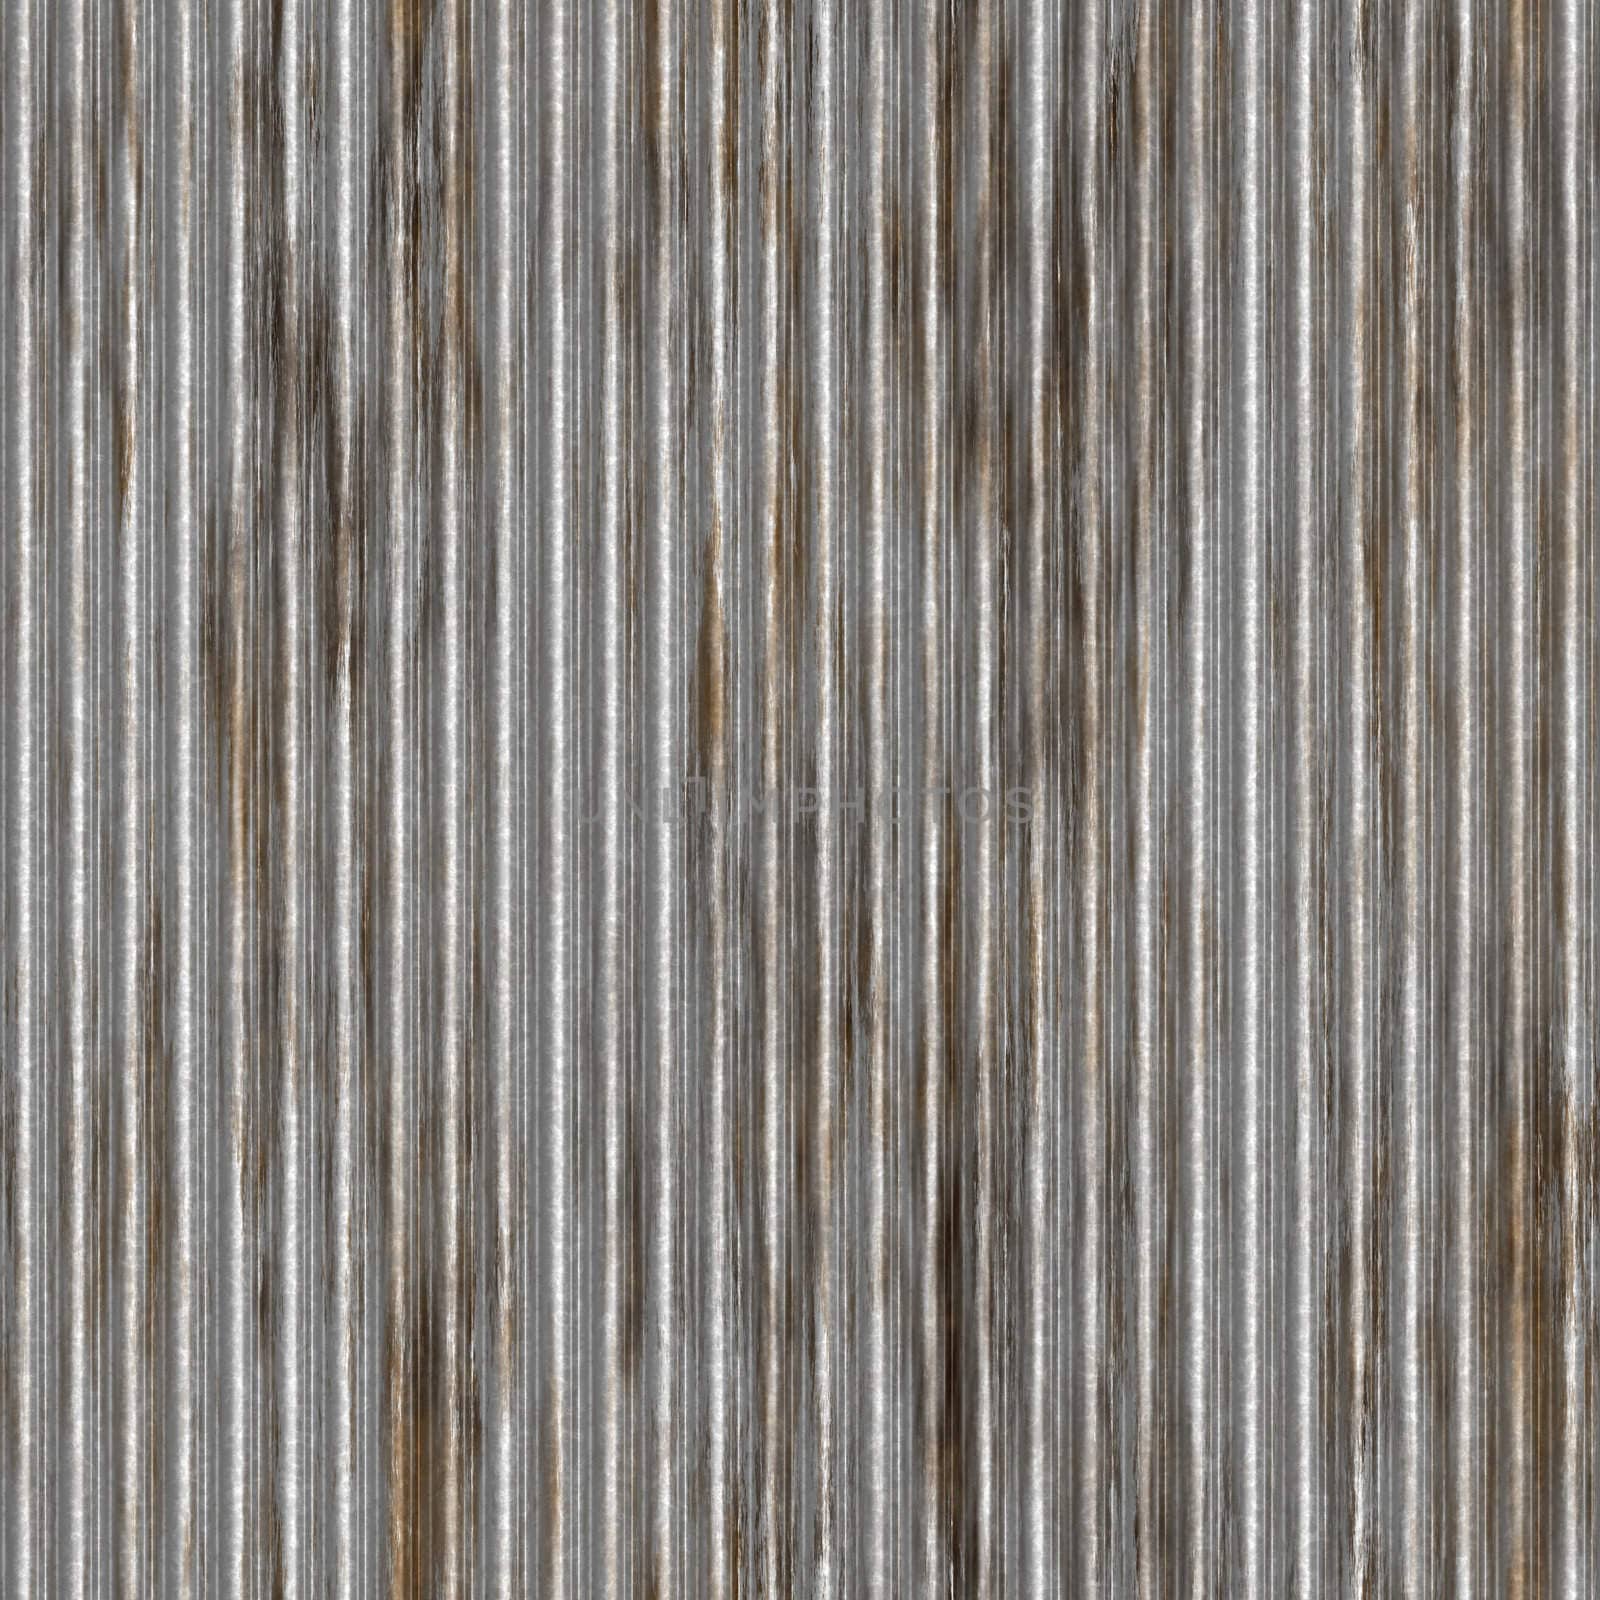 A corrugated metal texture with rust that tiles seamlessly as a pattern. Makes a great background or backdrop when tiled.